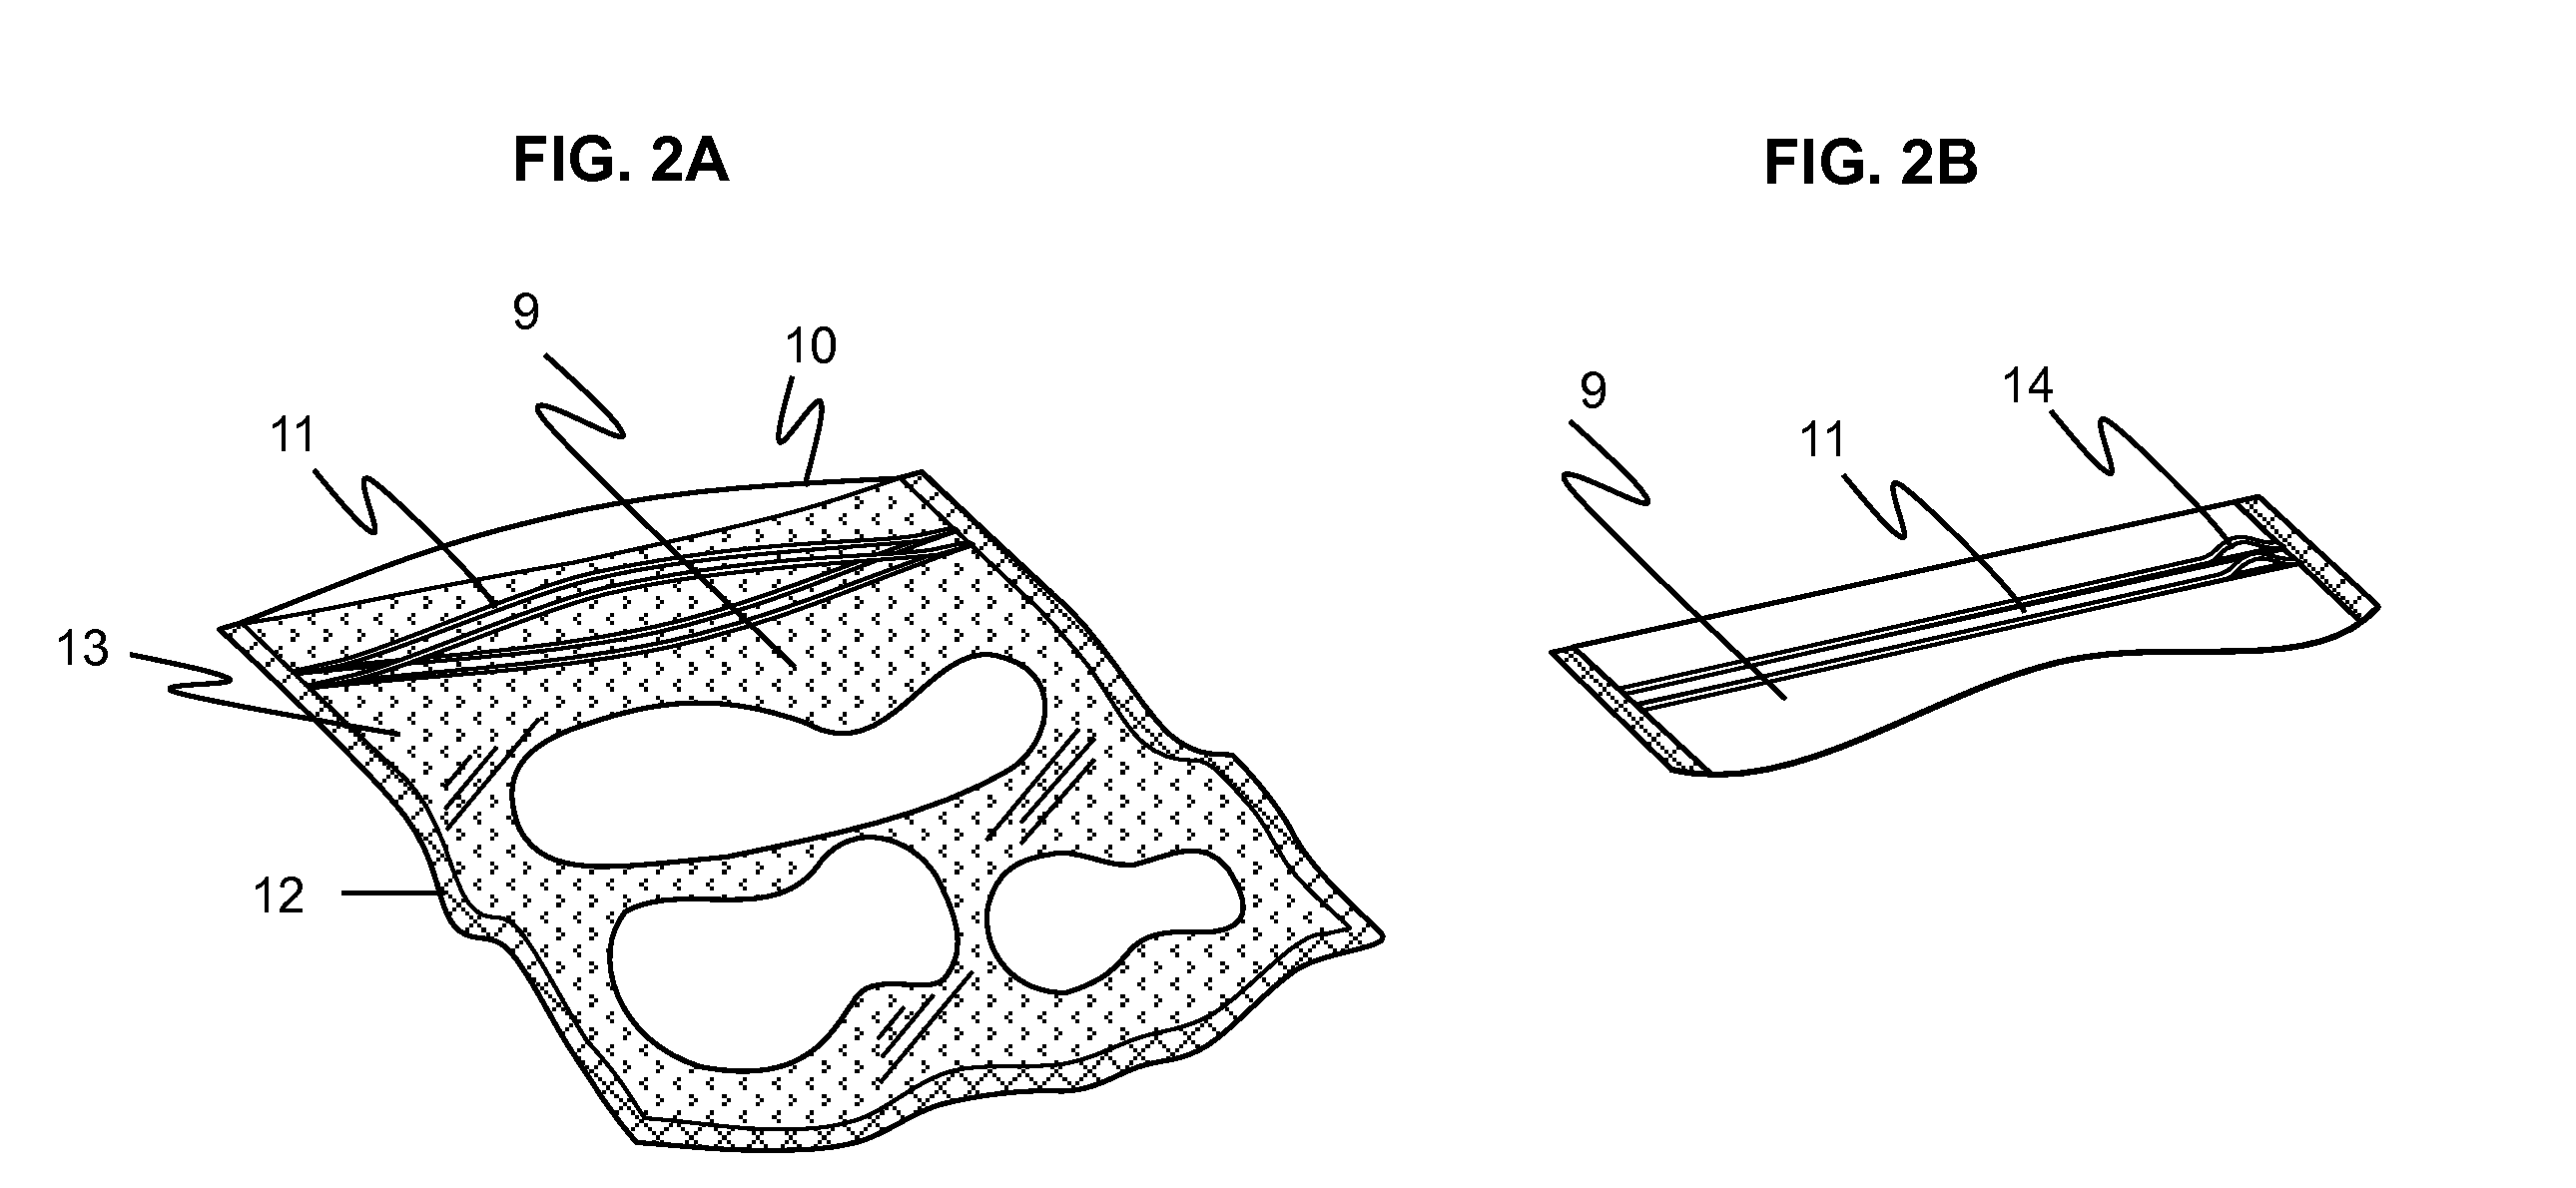 Method and apparatus for vacuum packing resealable bags